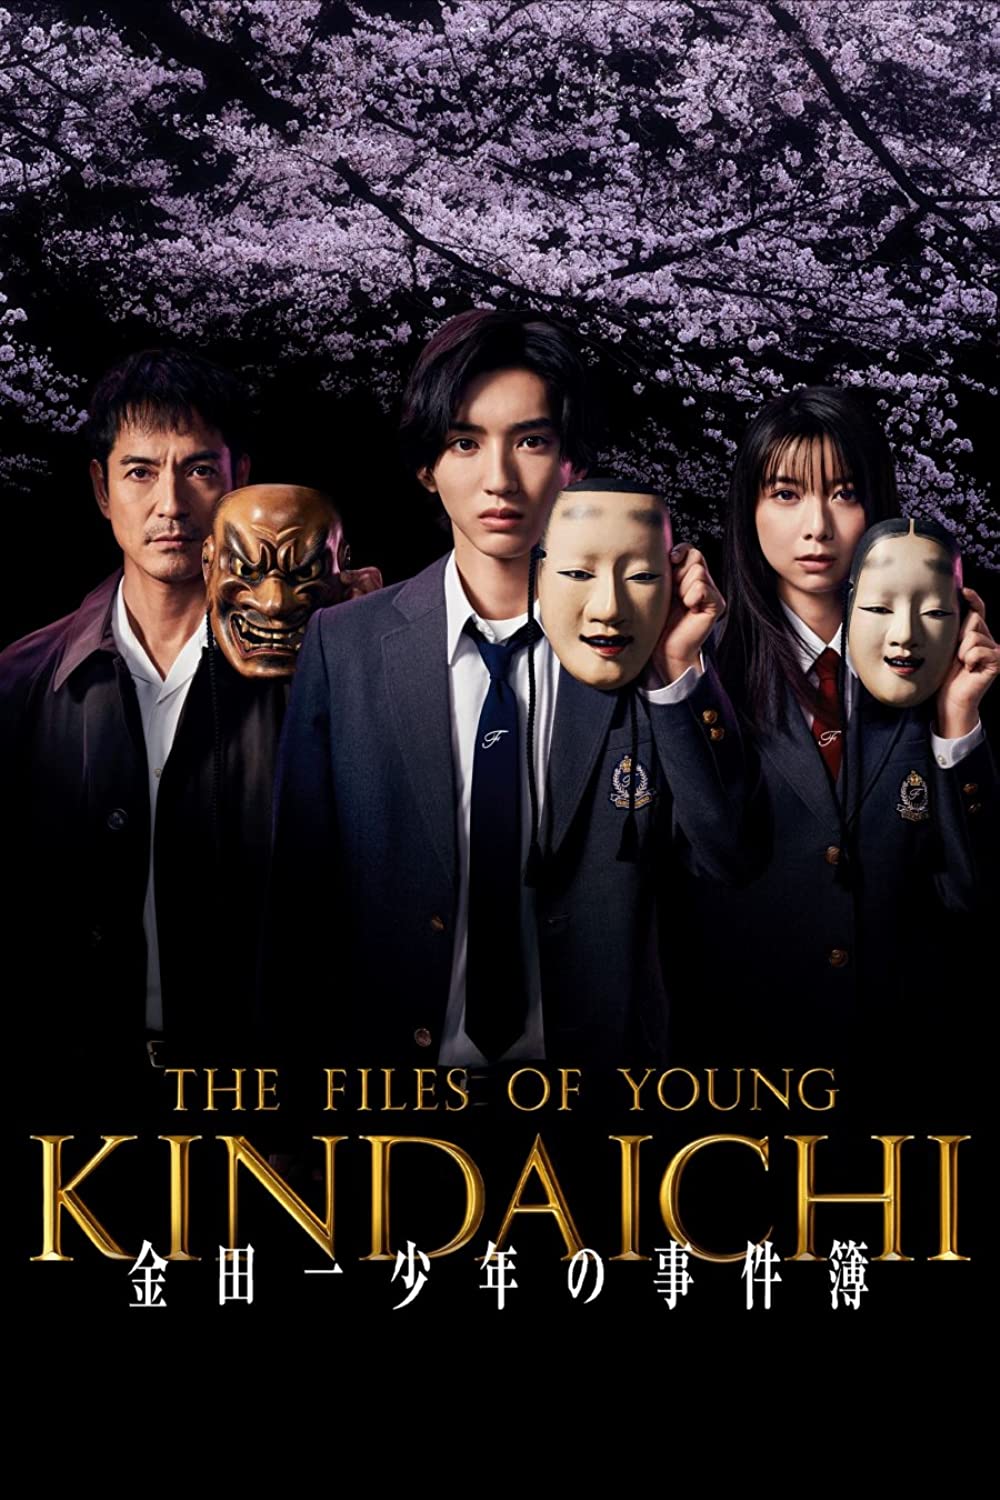 Download The Files of Young Kindaichi 2023 S01 Complete Hindi ORG Dual Audio 720p HDRip MSub 3.4GB